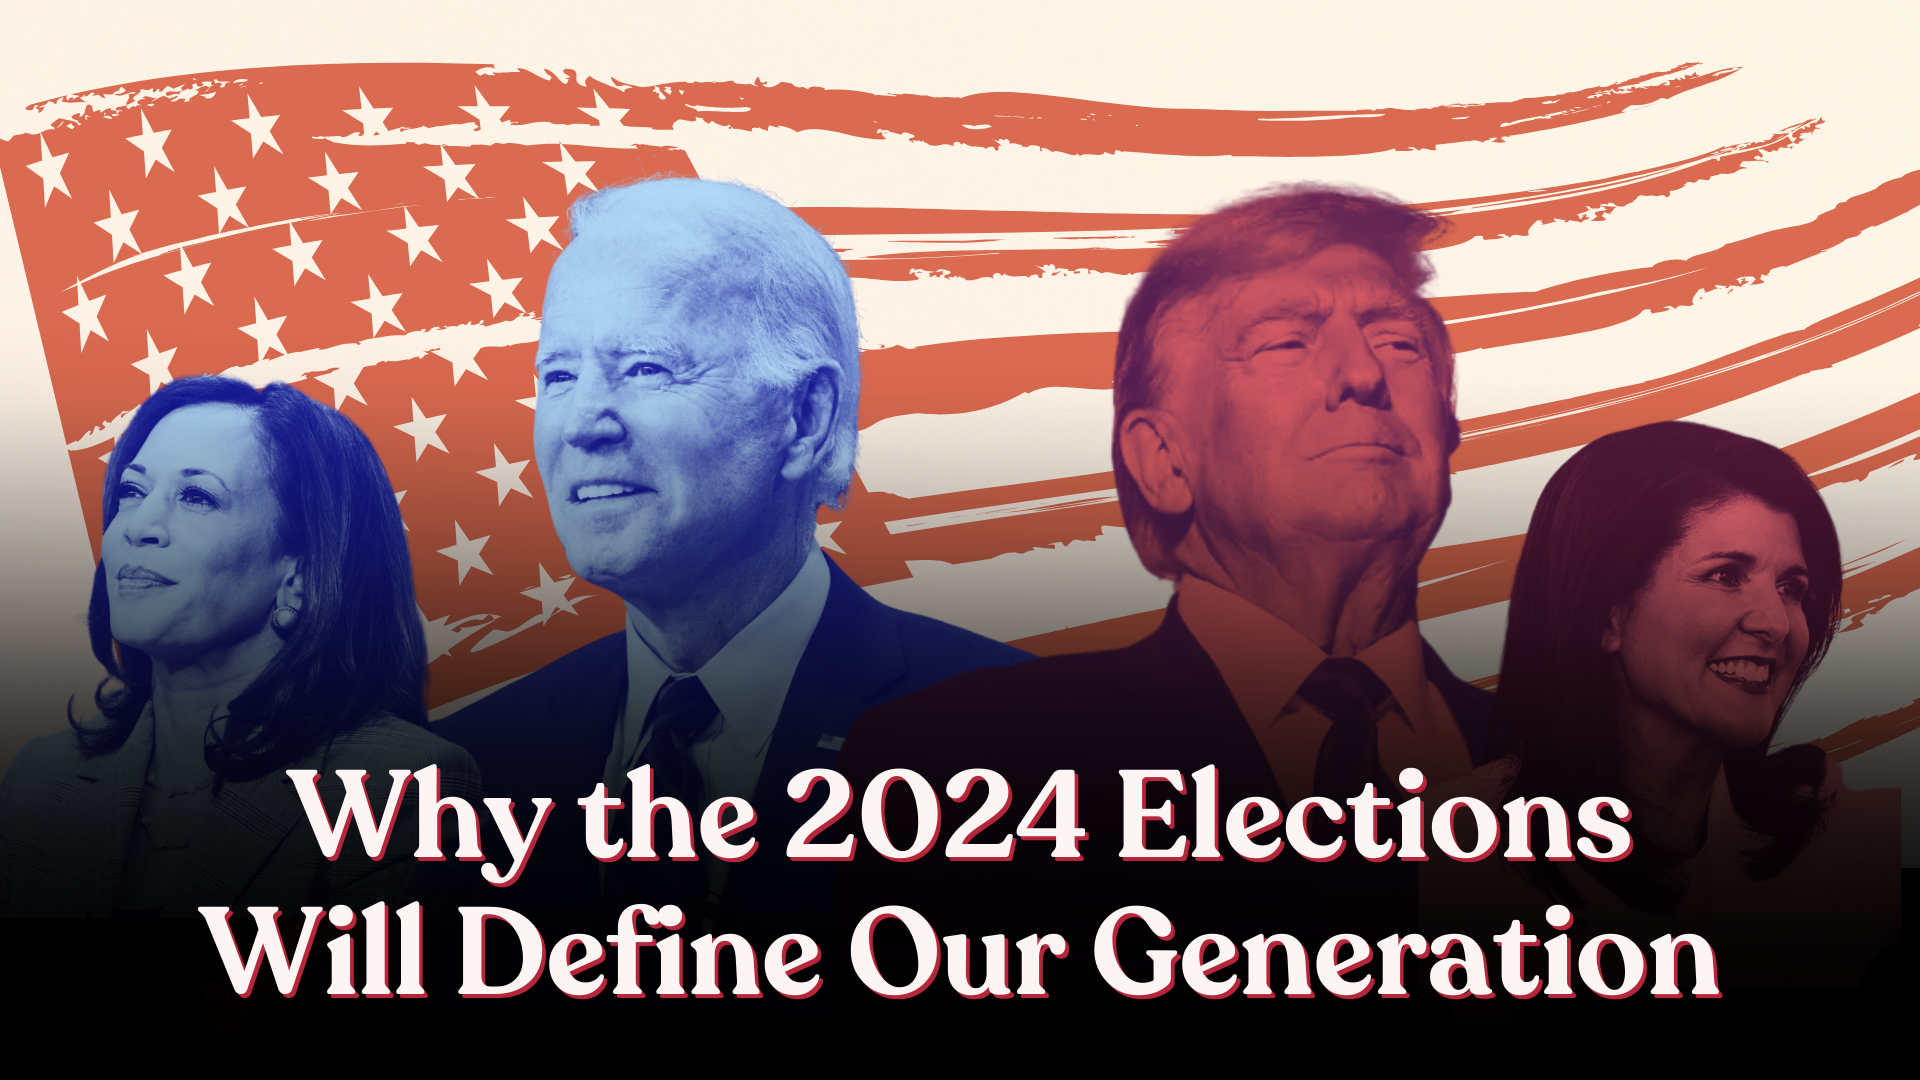 Donald Trump, Joe Biden, Kamala Harris, and Nikki Haley in front of an American flag with the text "Why the 2024 Elections Will Define Our Generation"